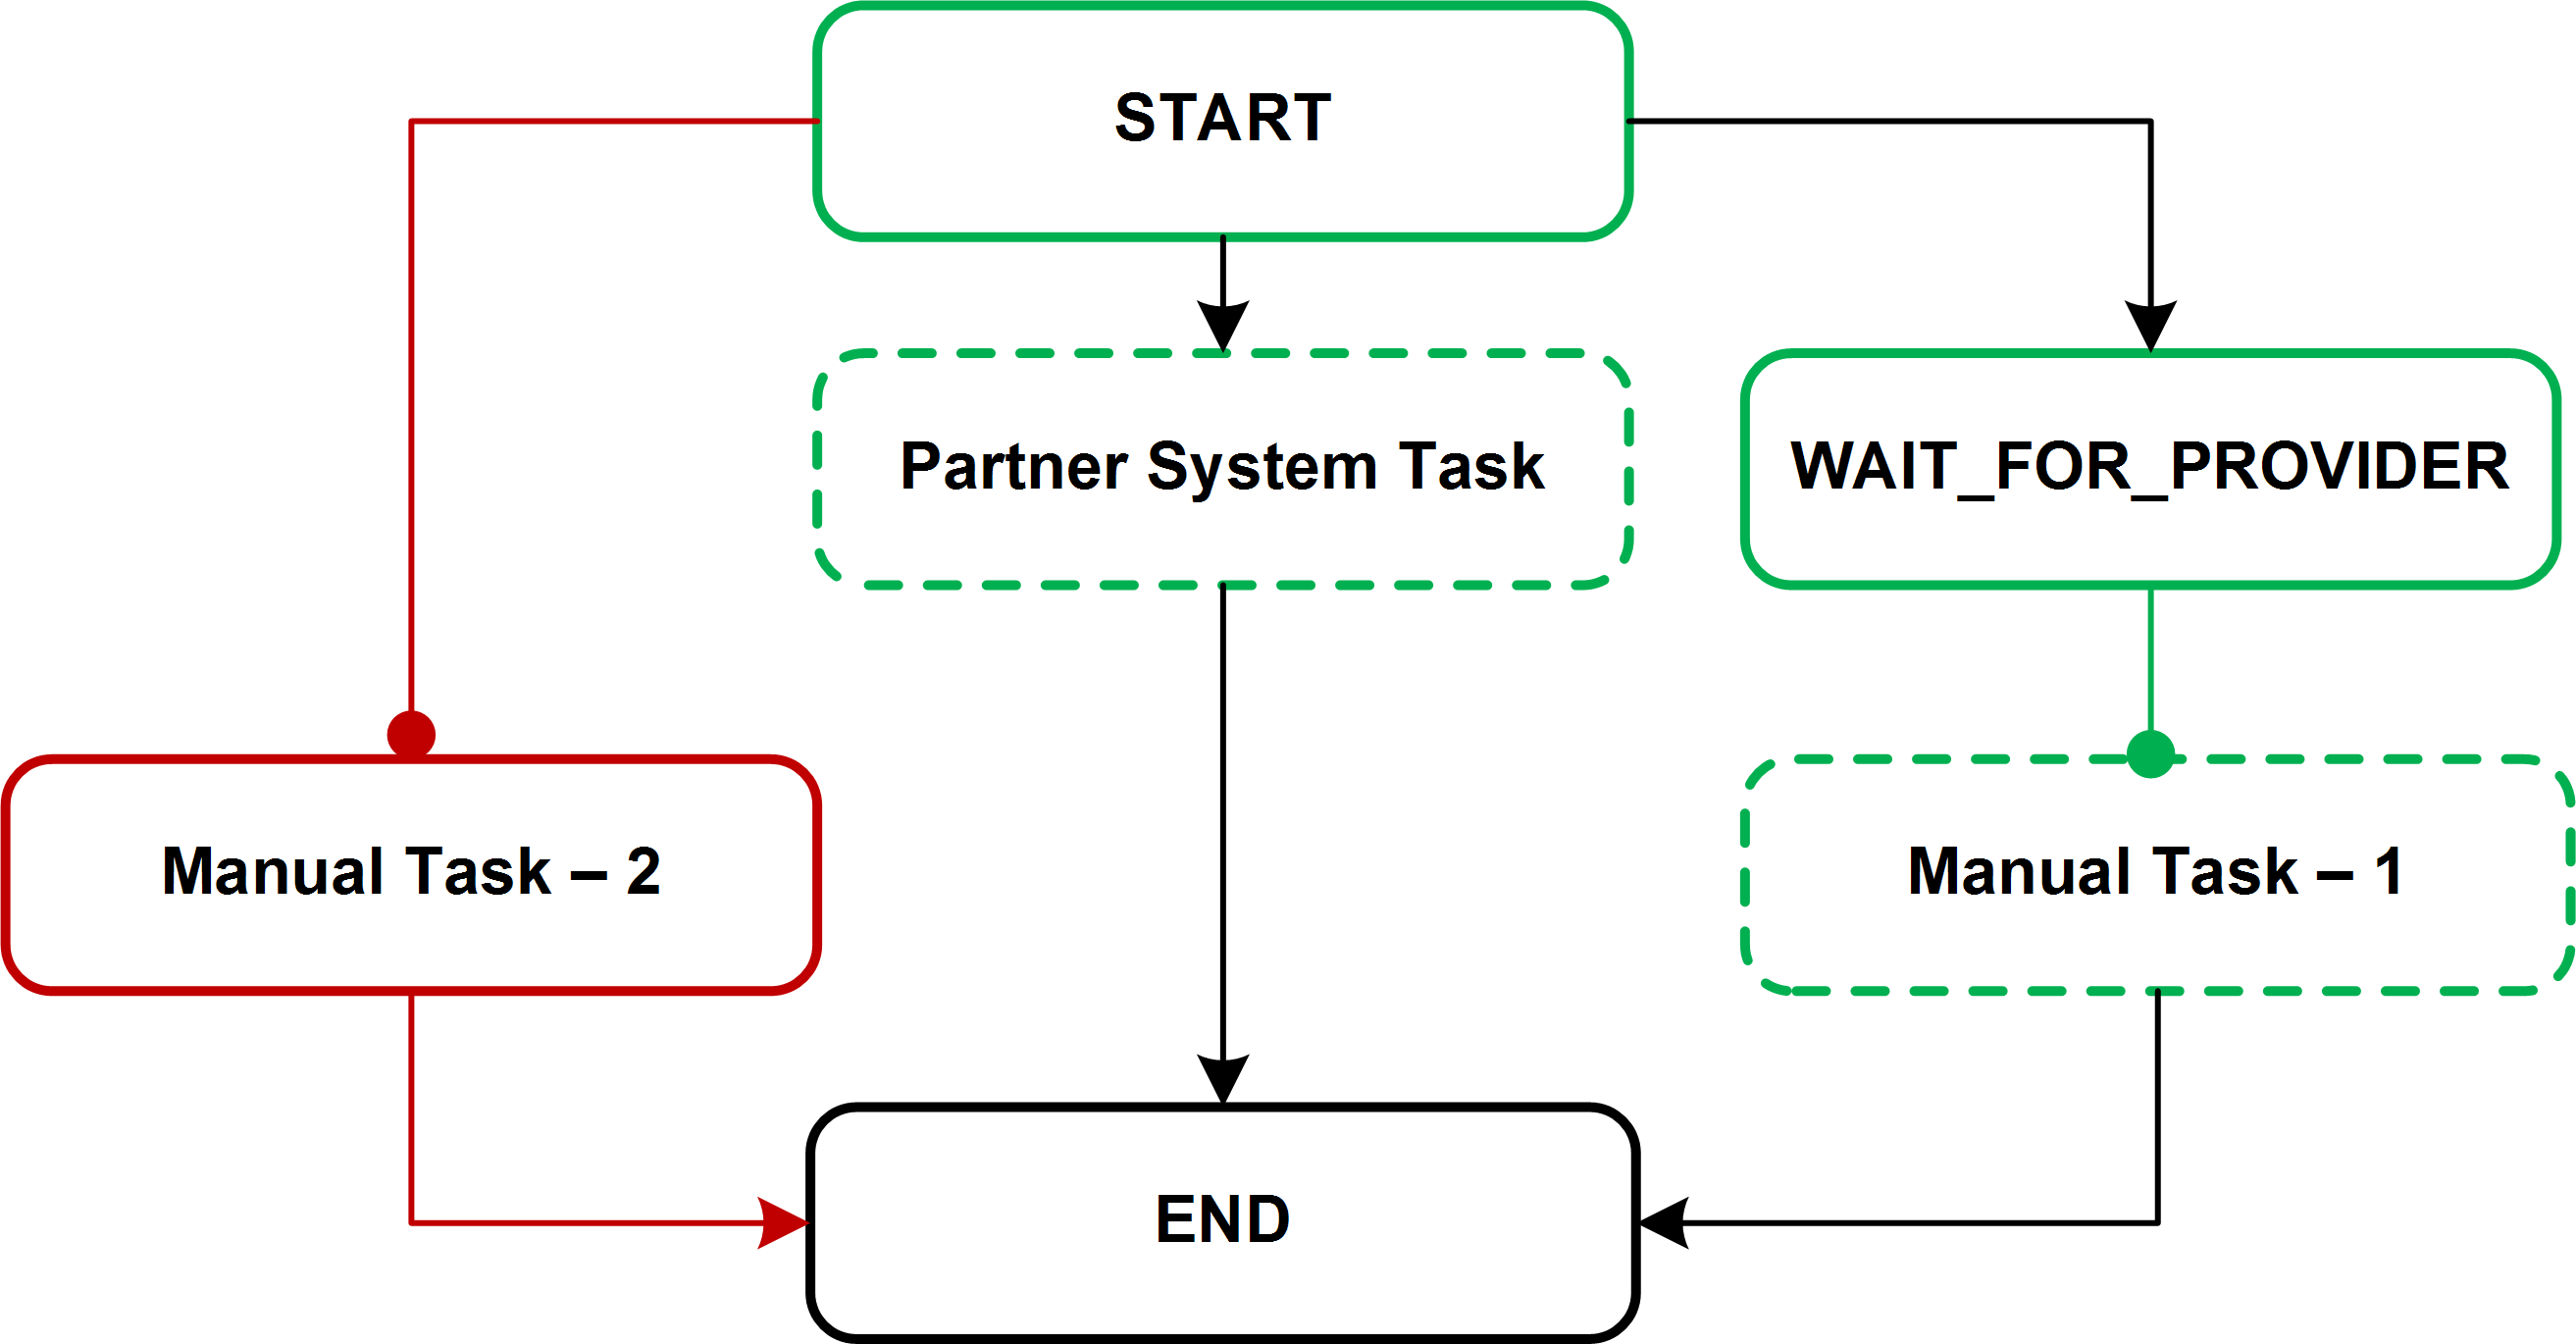 Image showing a process where an update is received from the partner, the "Provider Status" is set to "Pending Employer", the process "wakes up" and reevaluates the relevant conditions as depicted in the following illustration.